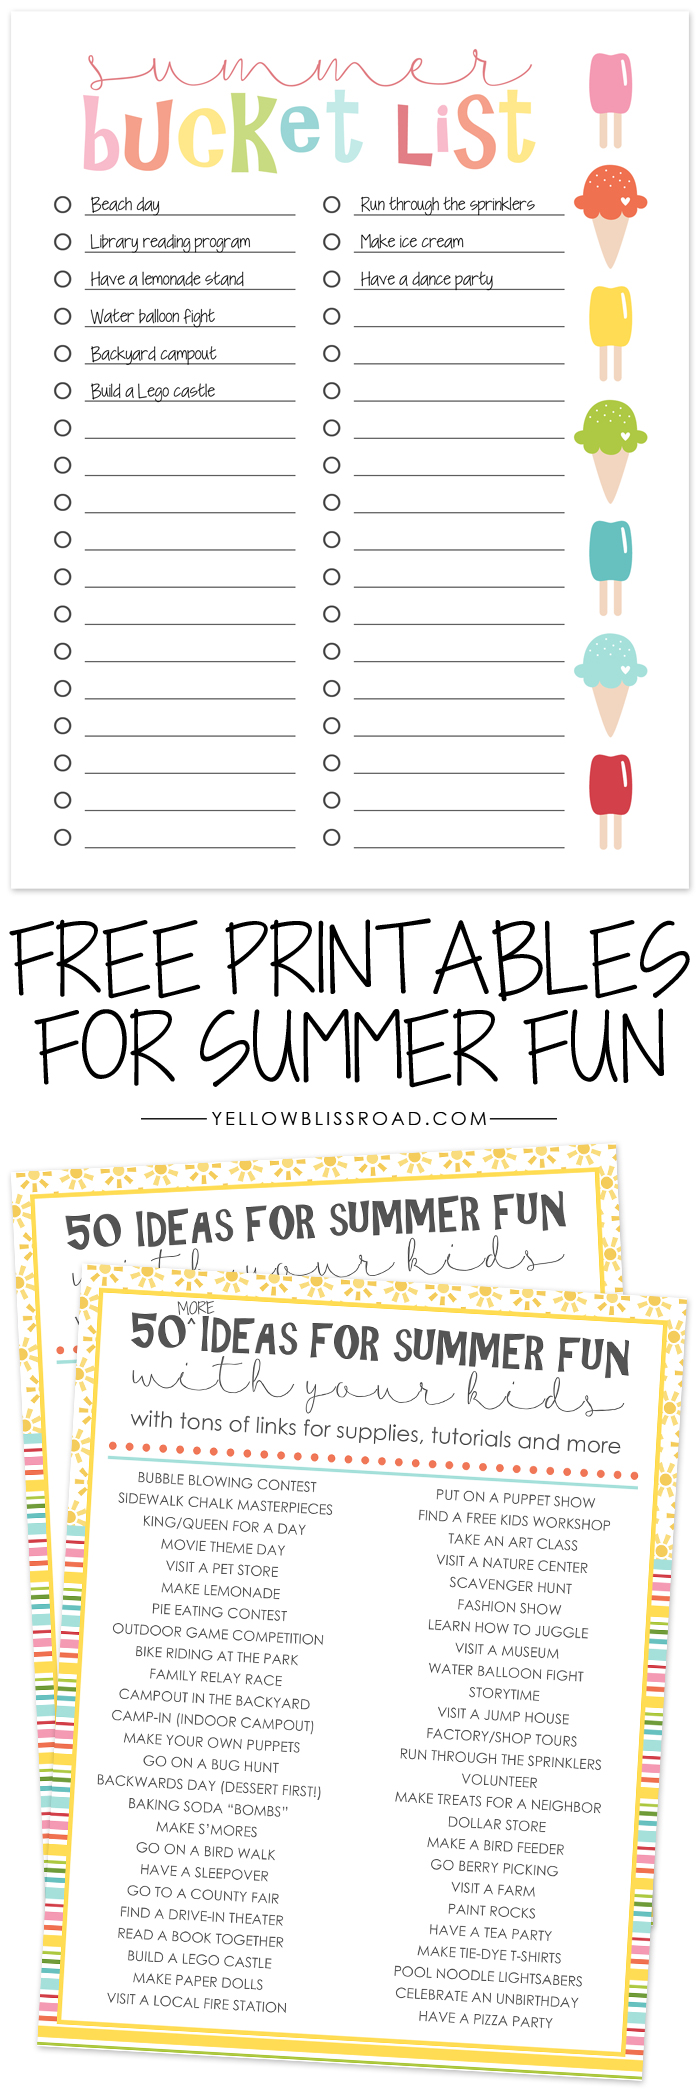 Keep up with your summer To-Do list with this Free Printable Summer Bucket List from Yellow Bliss Road! Don't forget all of these creative dollar store kids activities!